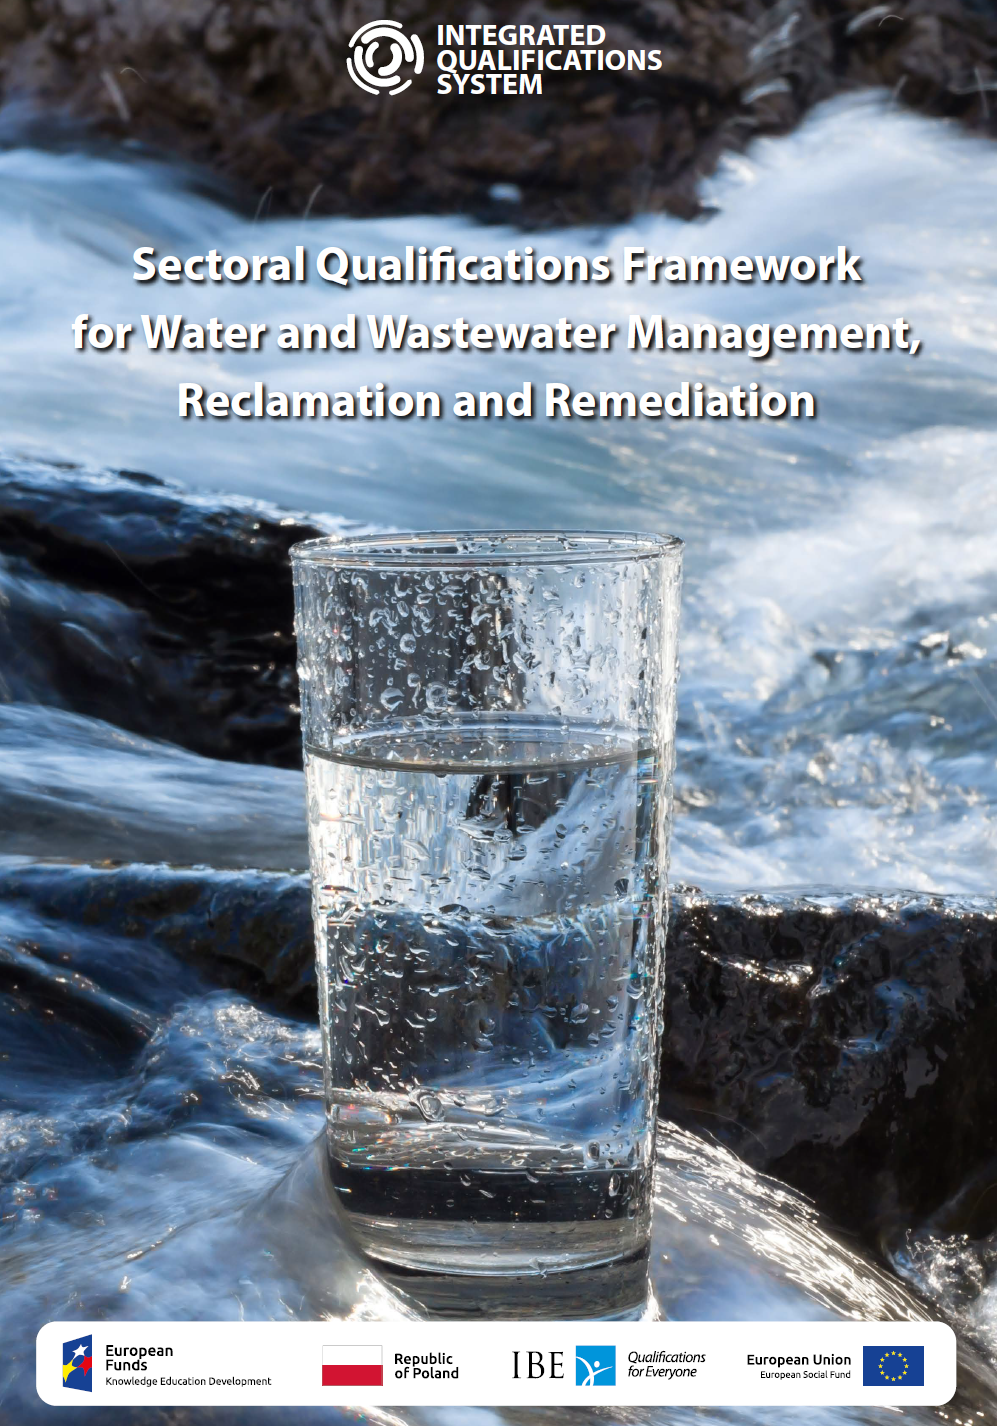 Sectoral Qualifications Framework for Water and Wastewater Management, Reclamation and Remediation